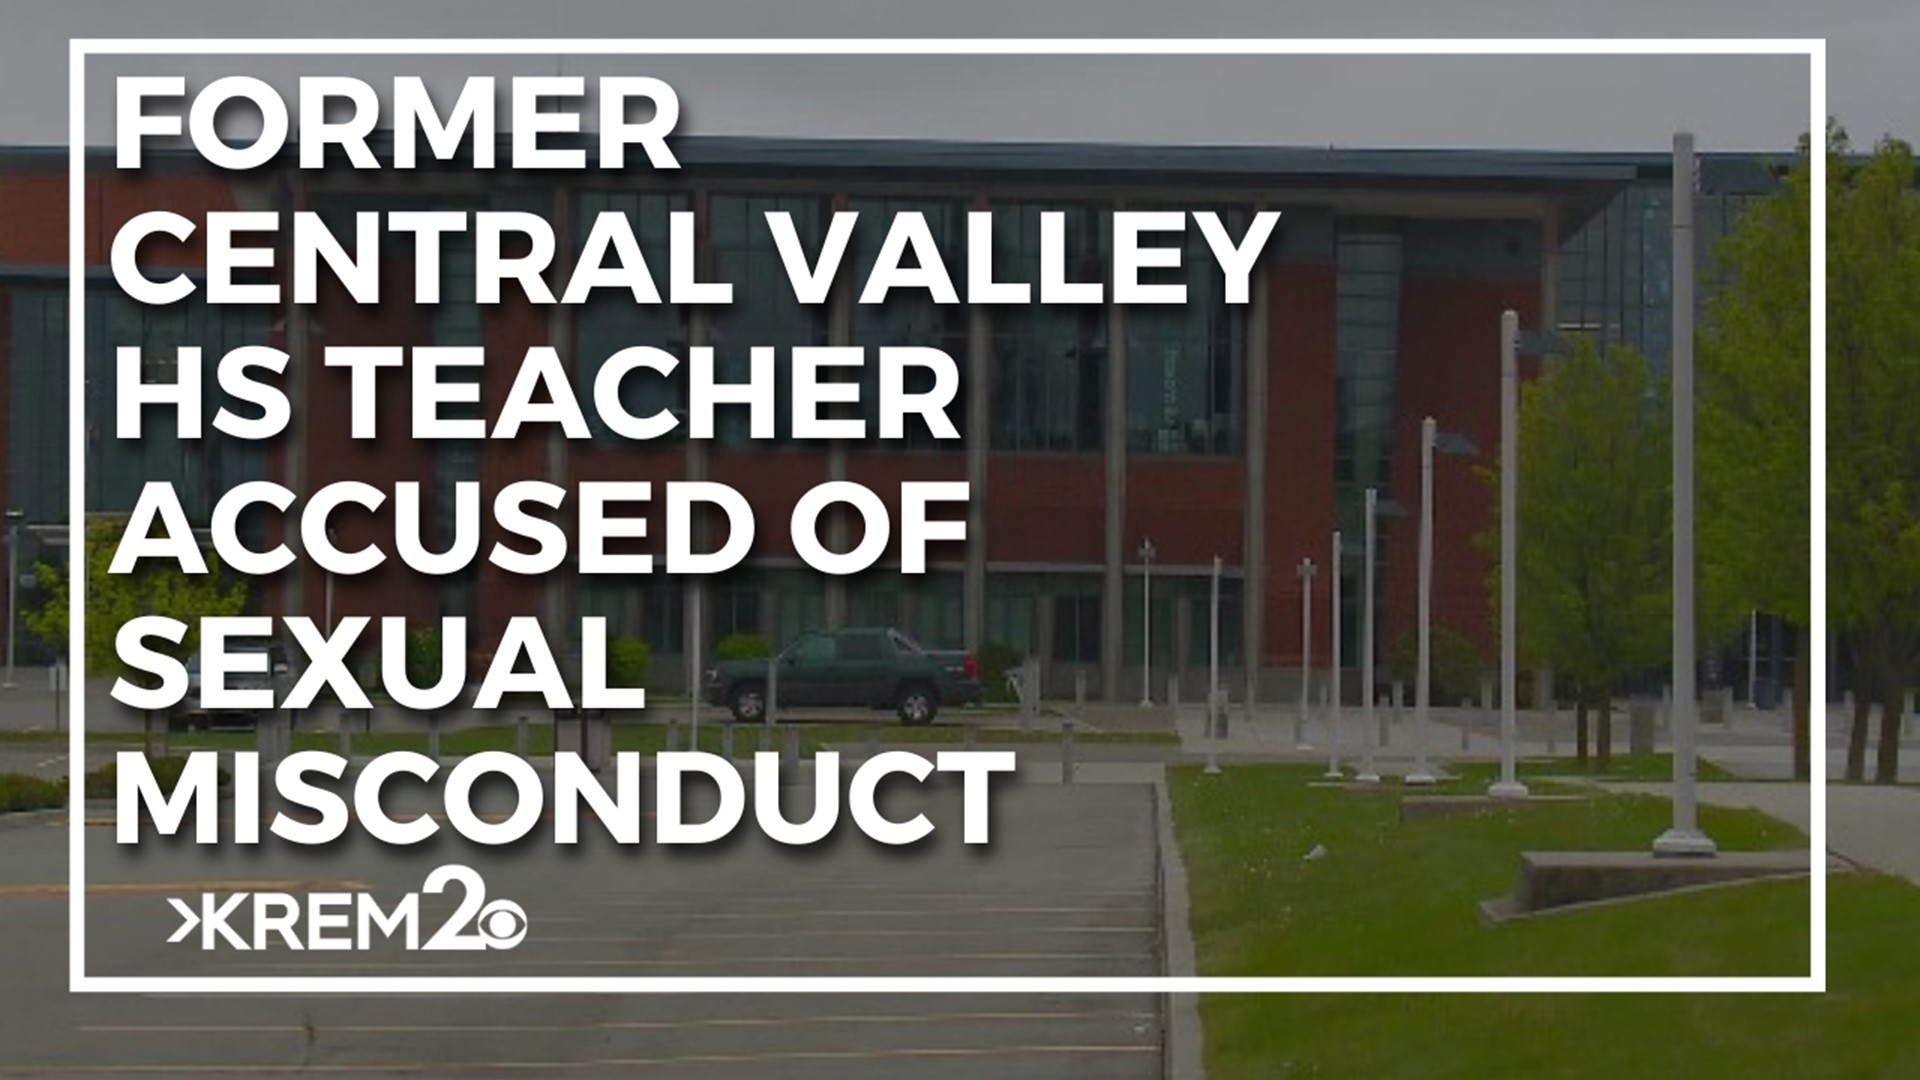 The Central Valley School District says the teacher was immediately placed on leave after the allegations came to light last December.